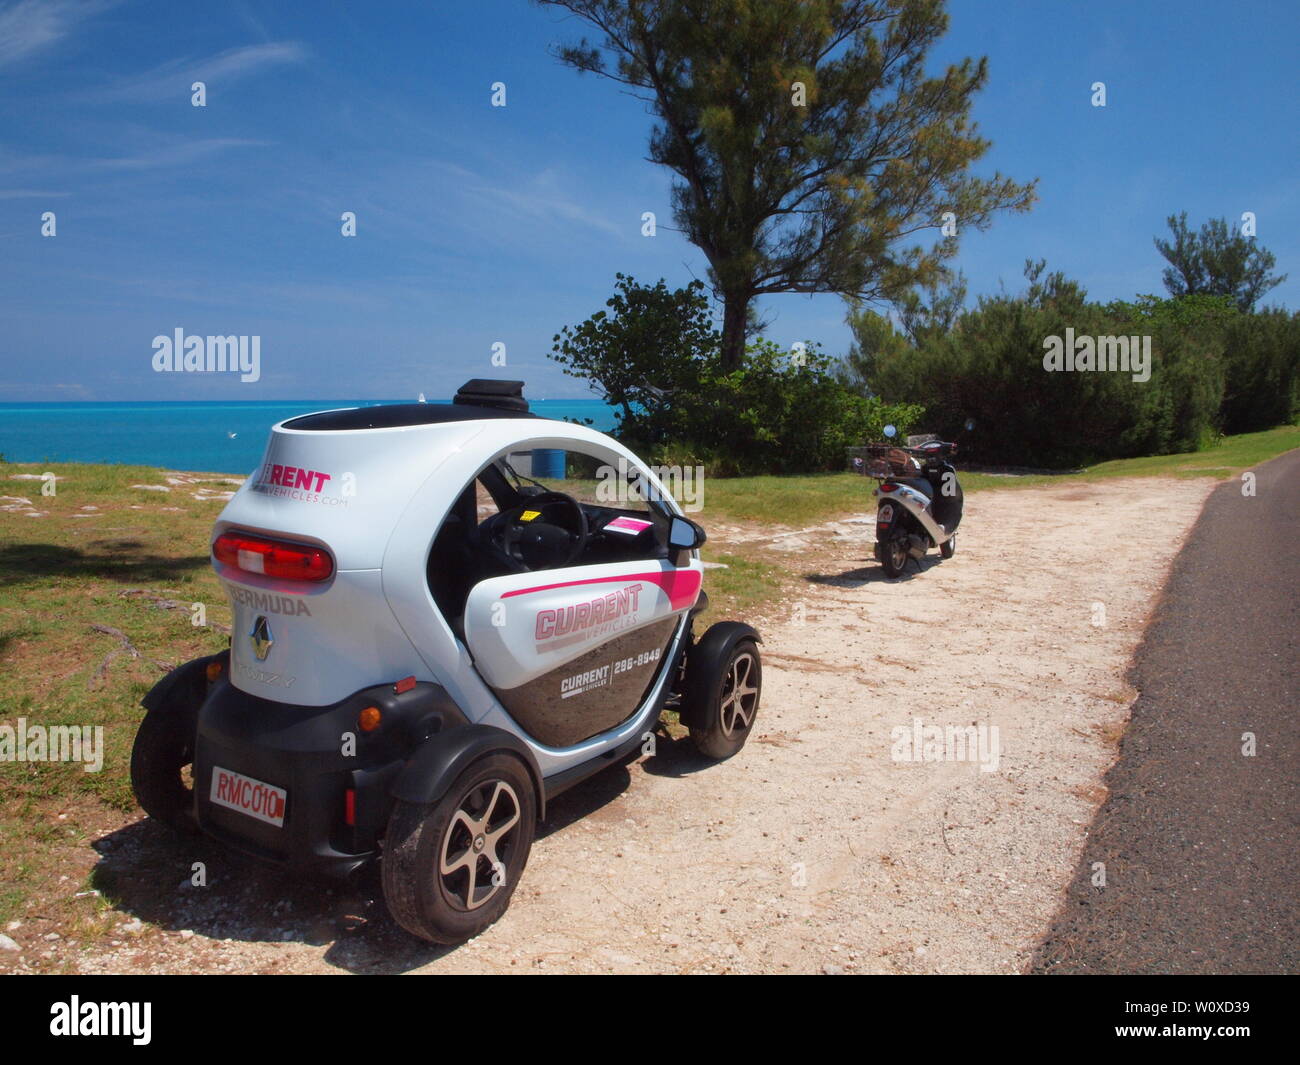 The latest tourist travel adventure in Bermuda. The Renault Twizy, an all electric vehicle that allows freedom and independence to tour safely. Stock Photo